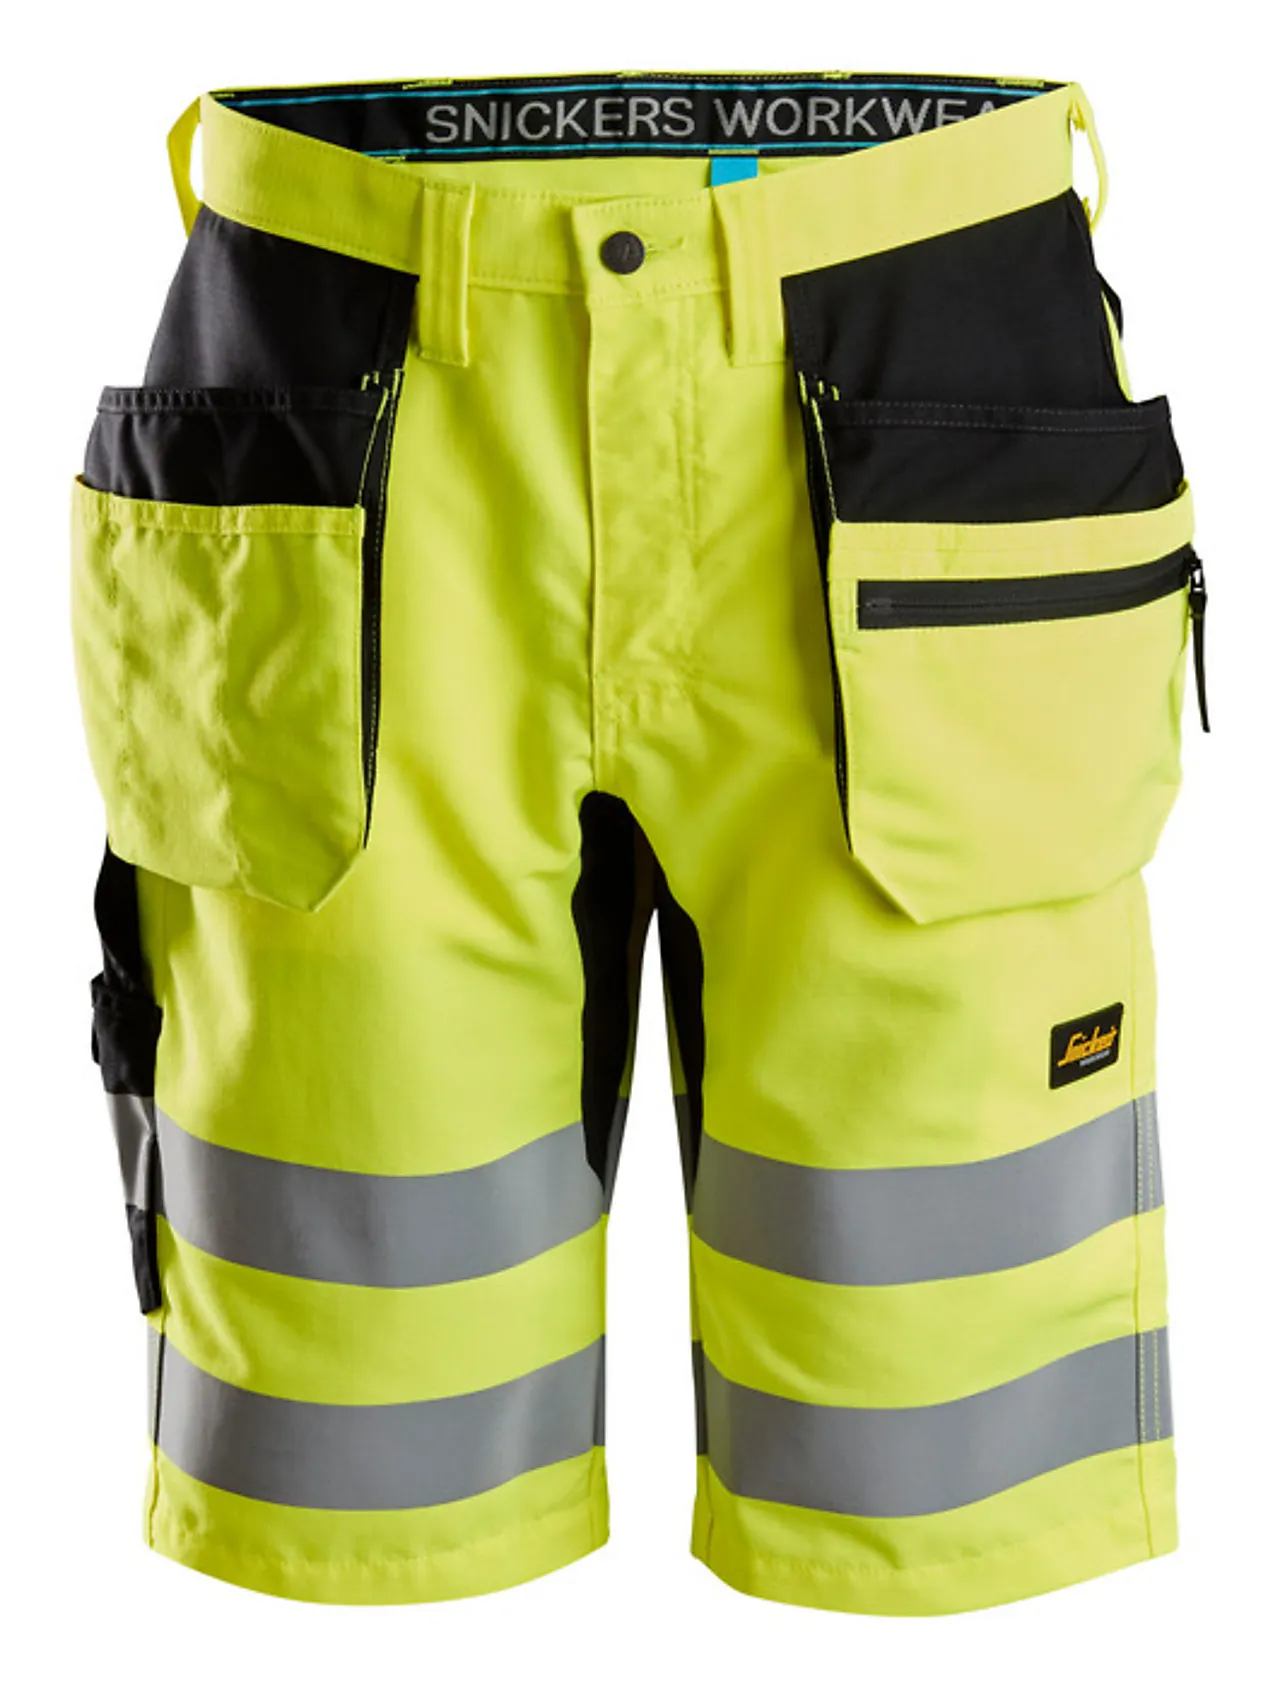 Shorts 6131 hp gul 52 kl1snickers workwear